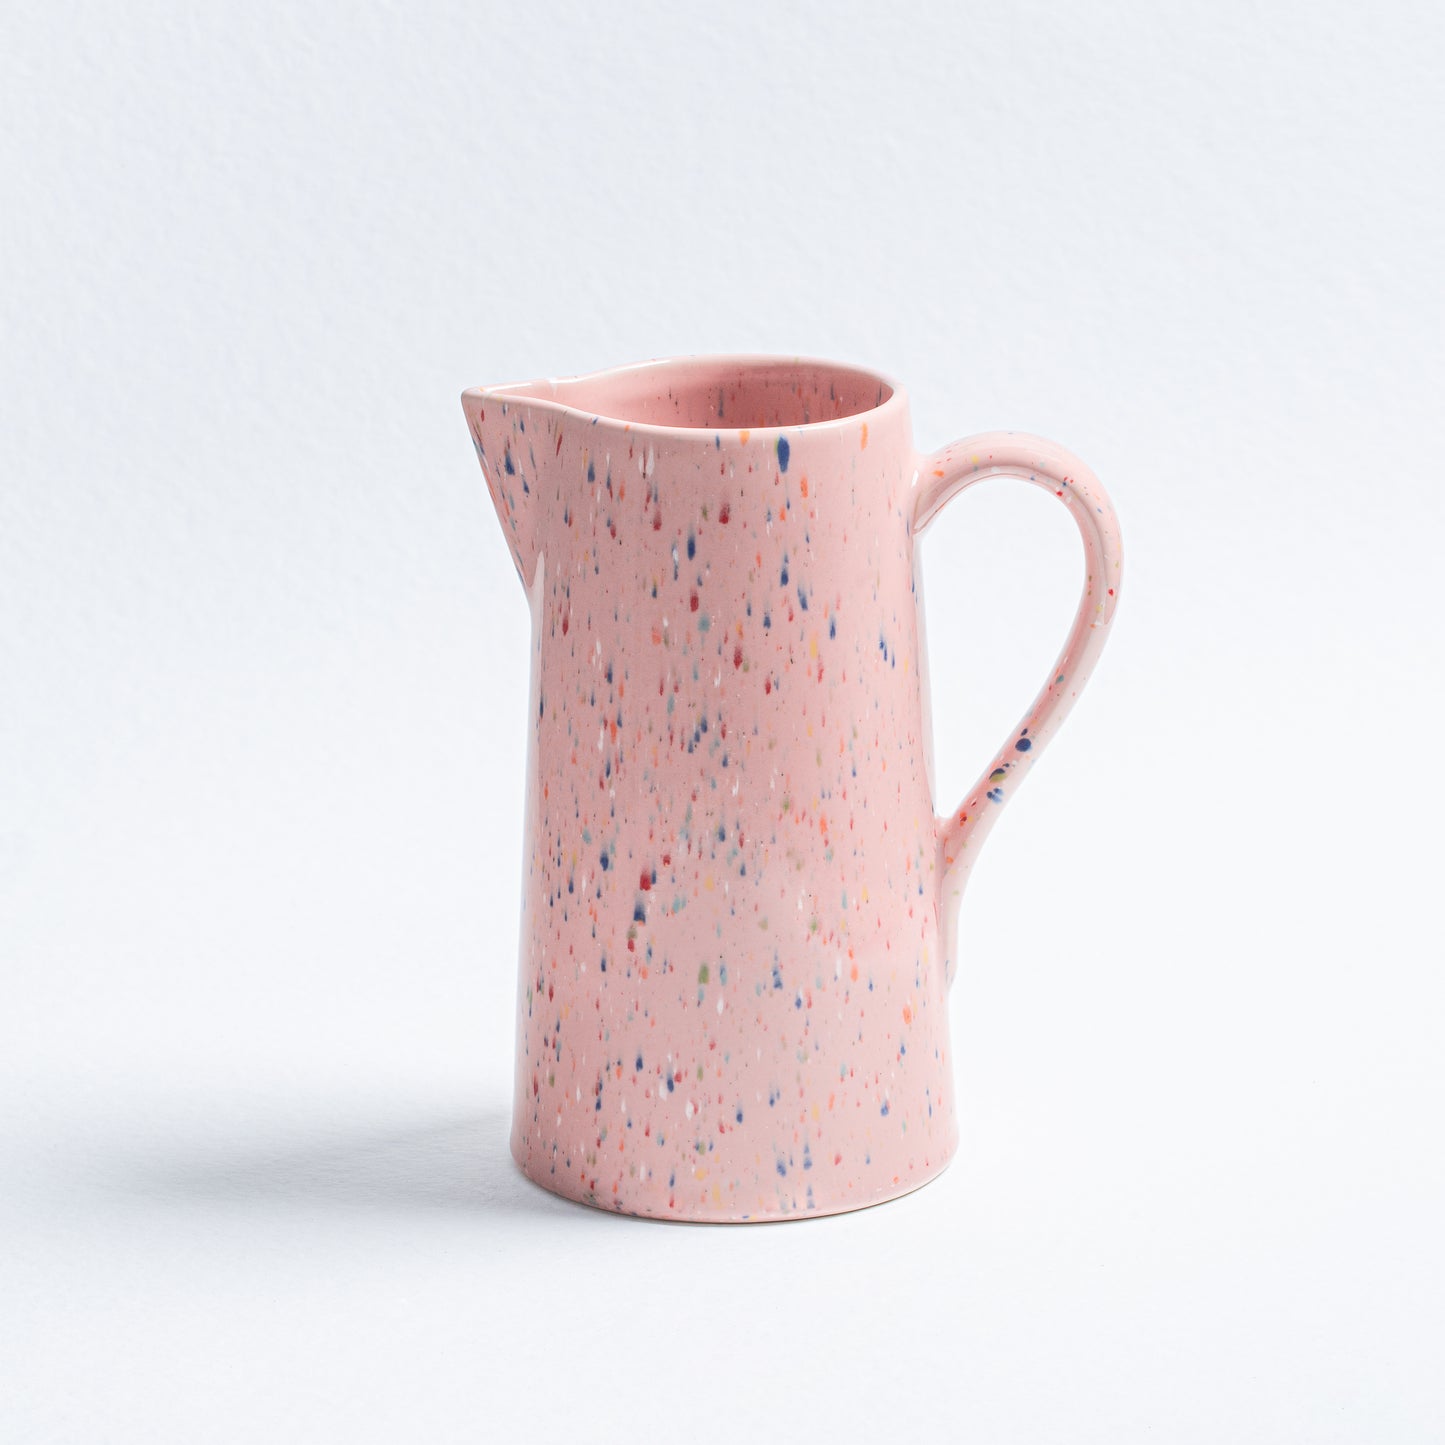 New Party Pitcher 1.5L Pink